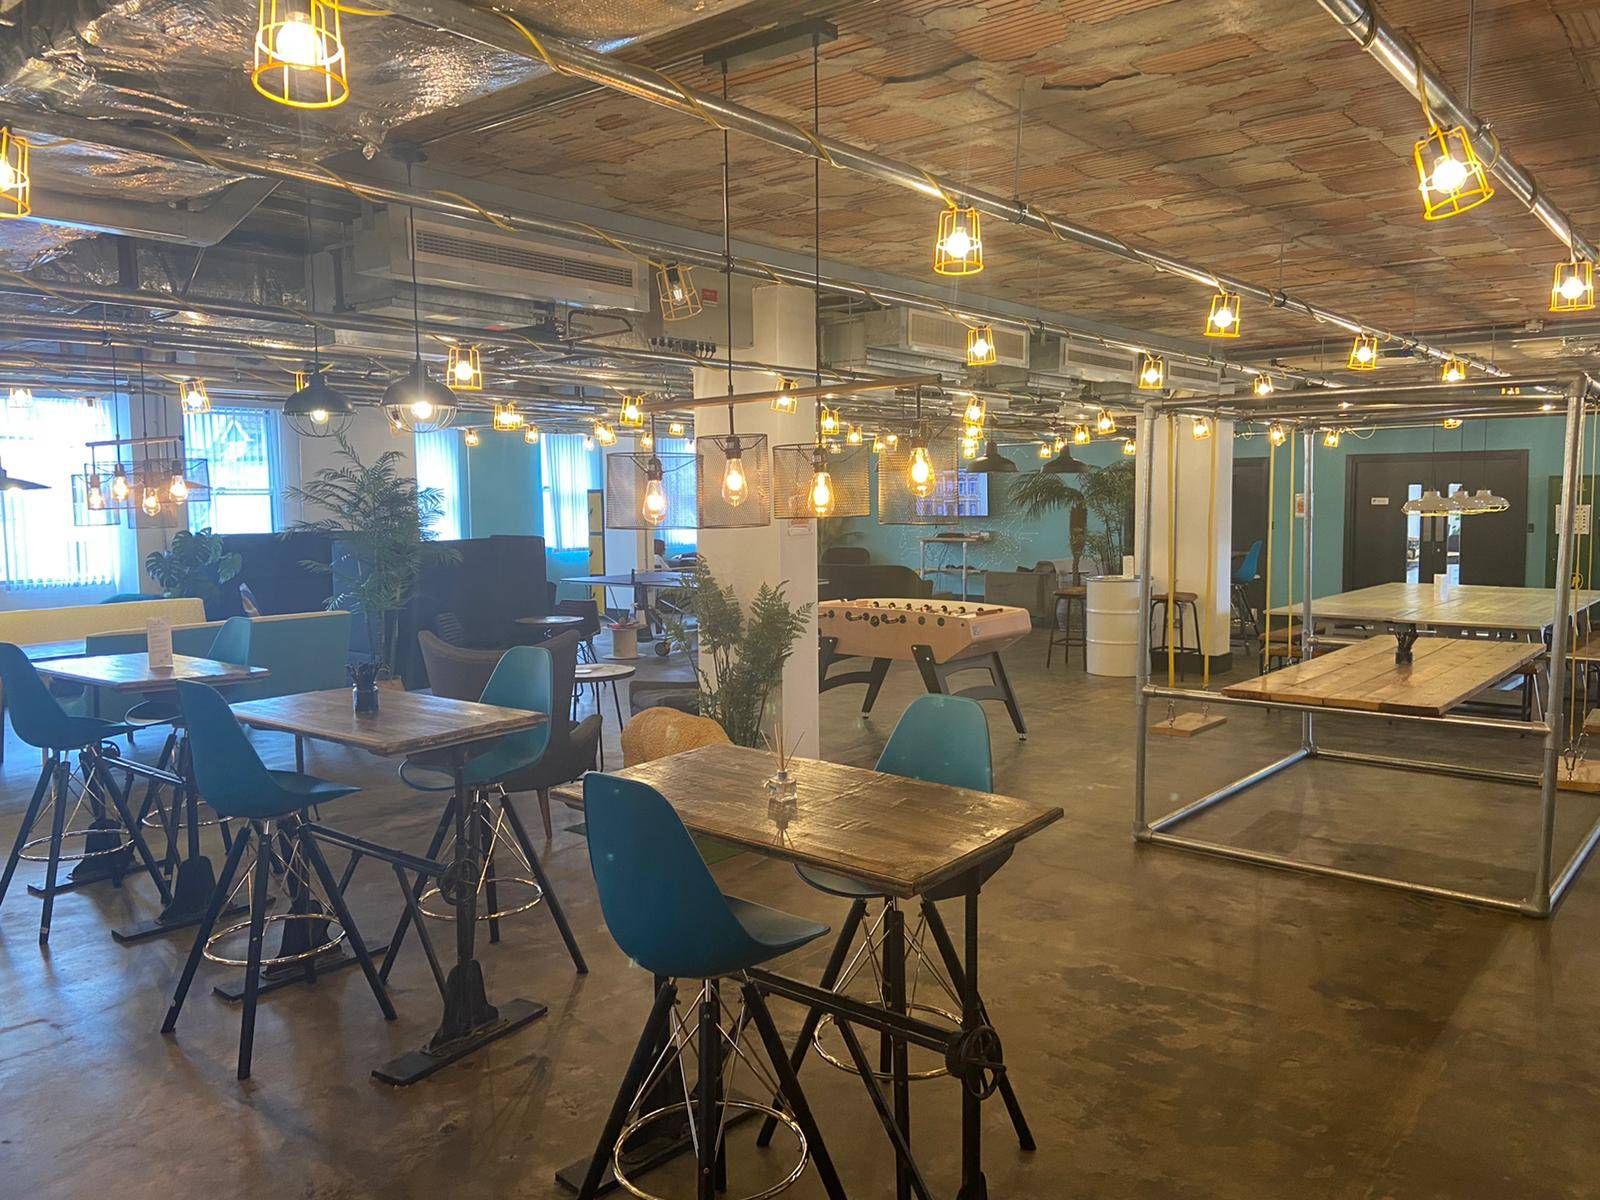 Norwich city’s first business incubator has opened its doors